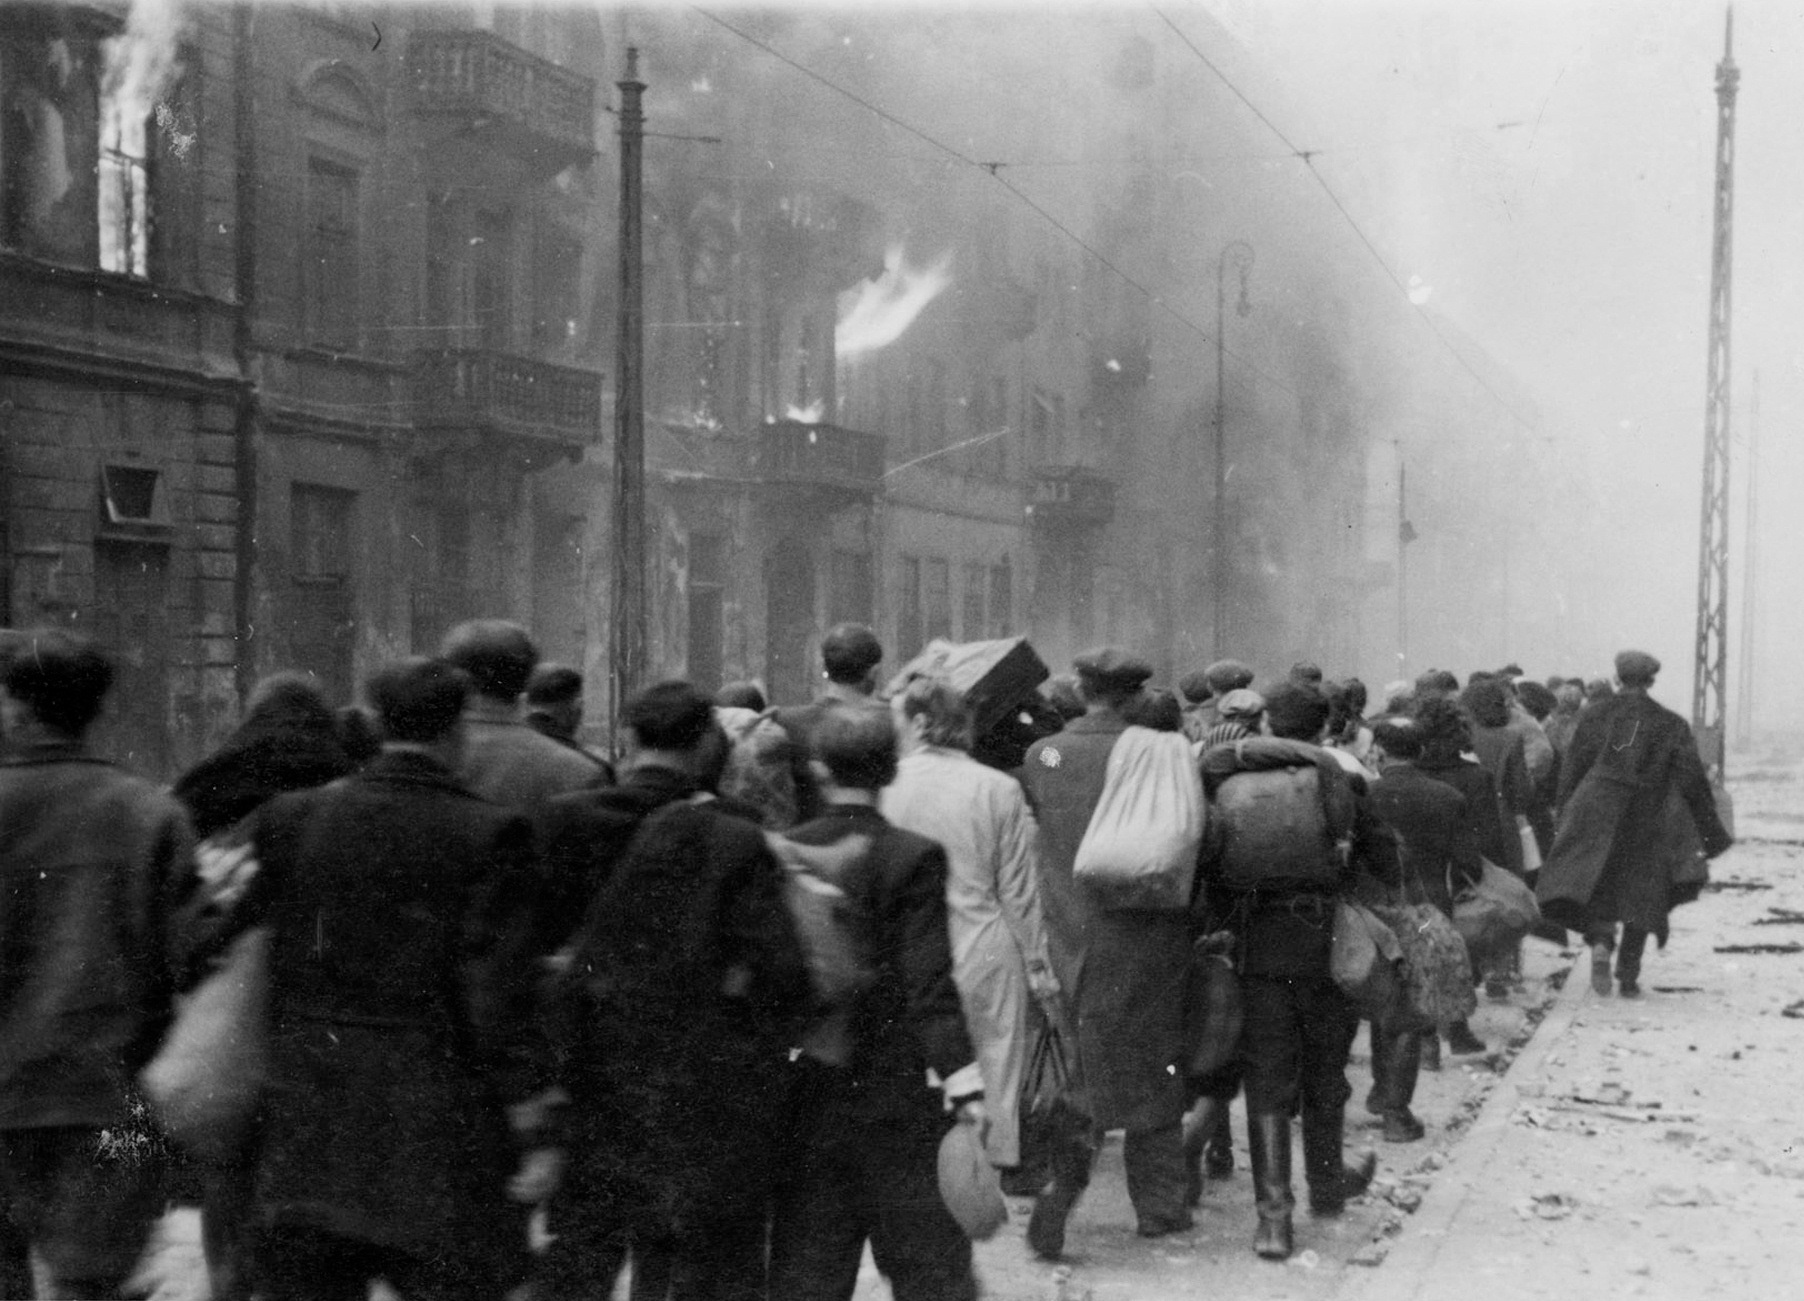 Jews being marched to the Umschlagplatz rail station for deportation, Warsaw, Poland, Apr-May 1943